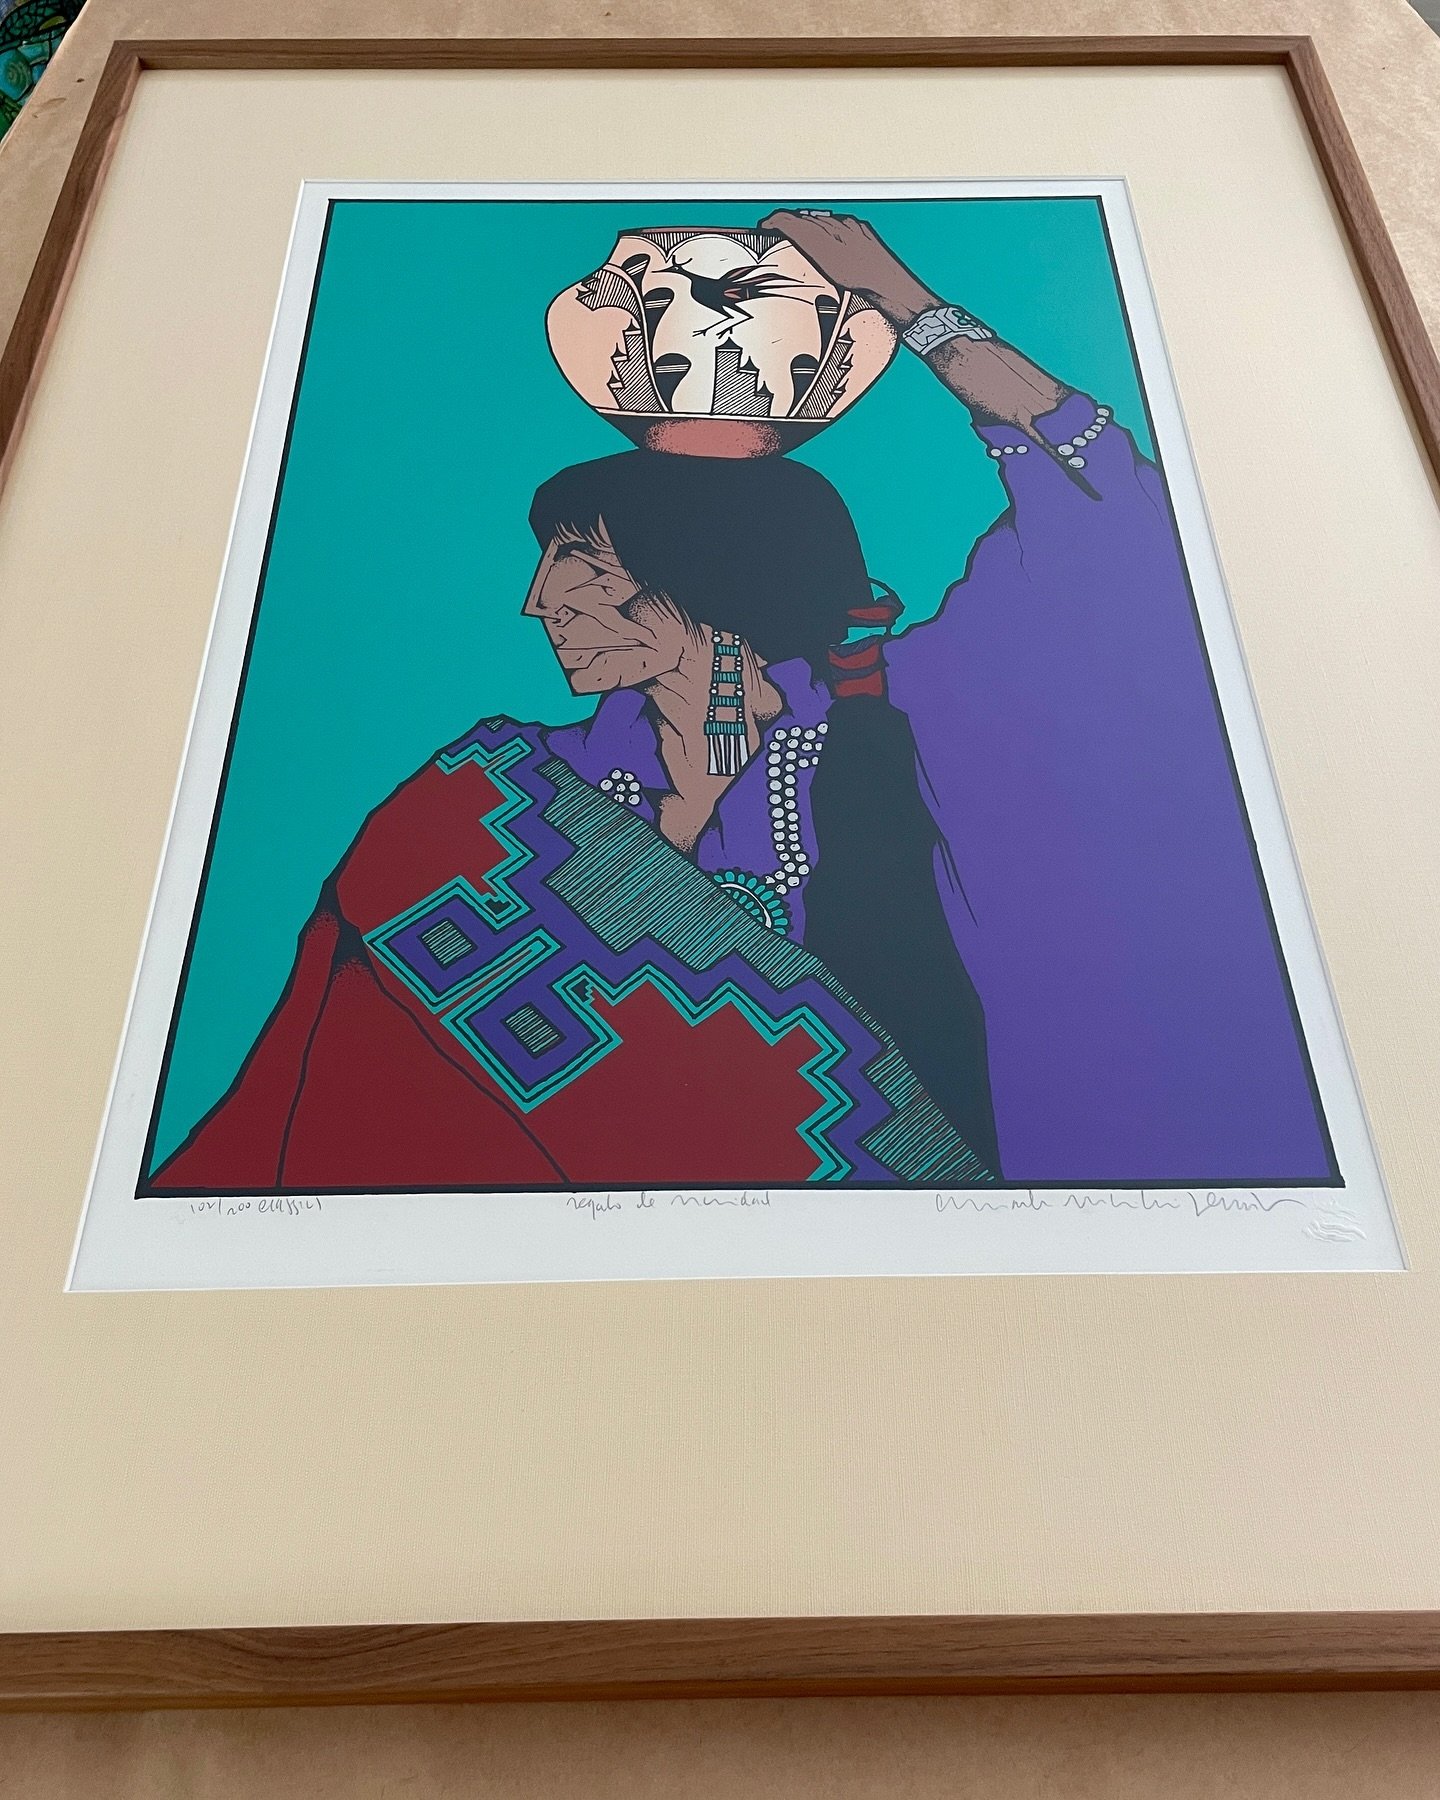 It was time to update this Amado Pena lithograph. Picked up in Santa Fe and framed many years ago, she needed a little make over. 

Previously framed with a black silk wrapped mat and a chunky high gloss black frame. She had found a new spot over a c